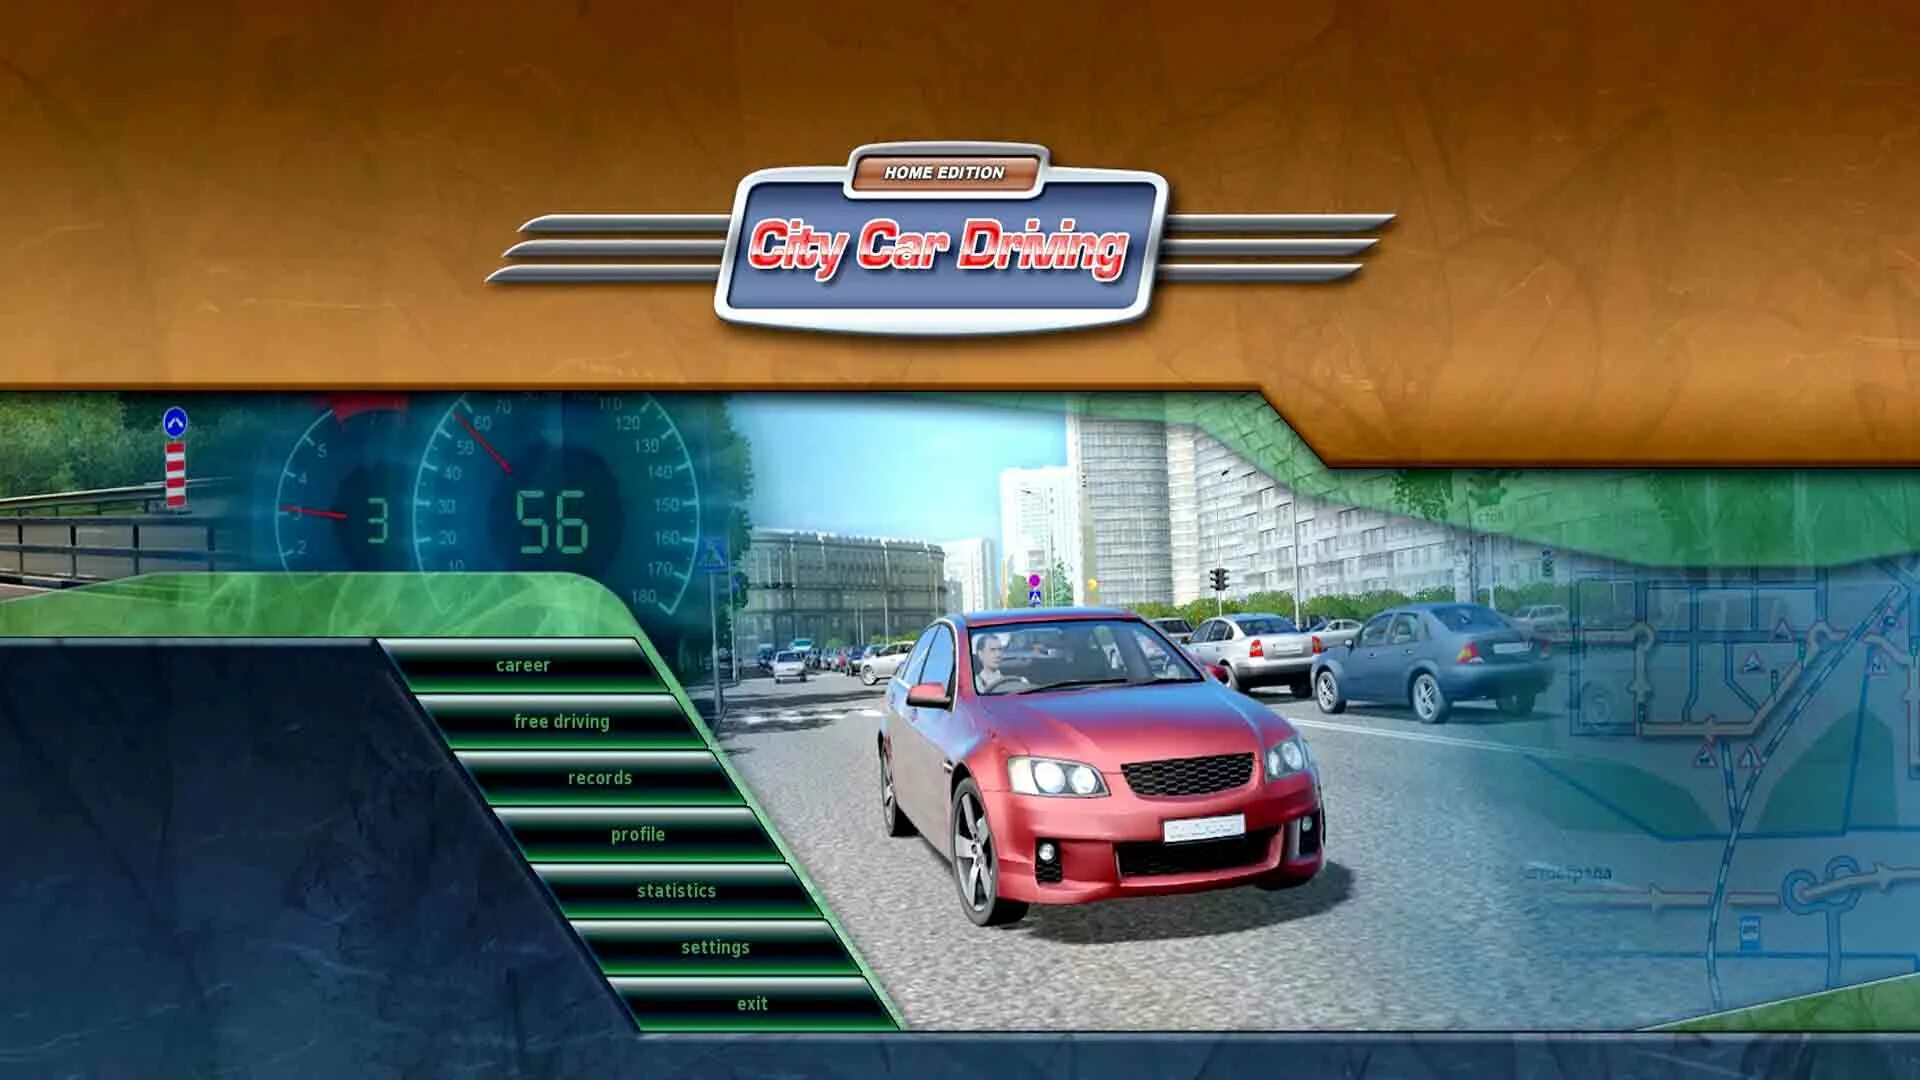 Exe car drives. City car Driving диск. City car Driving 2020 ПК. Диск City car Driving на Xbox one. City car Driving меню.